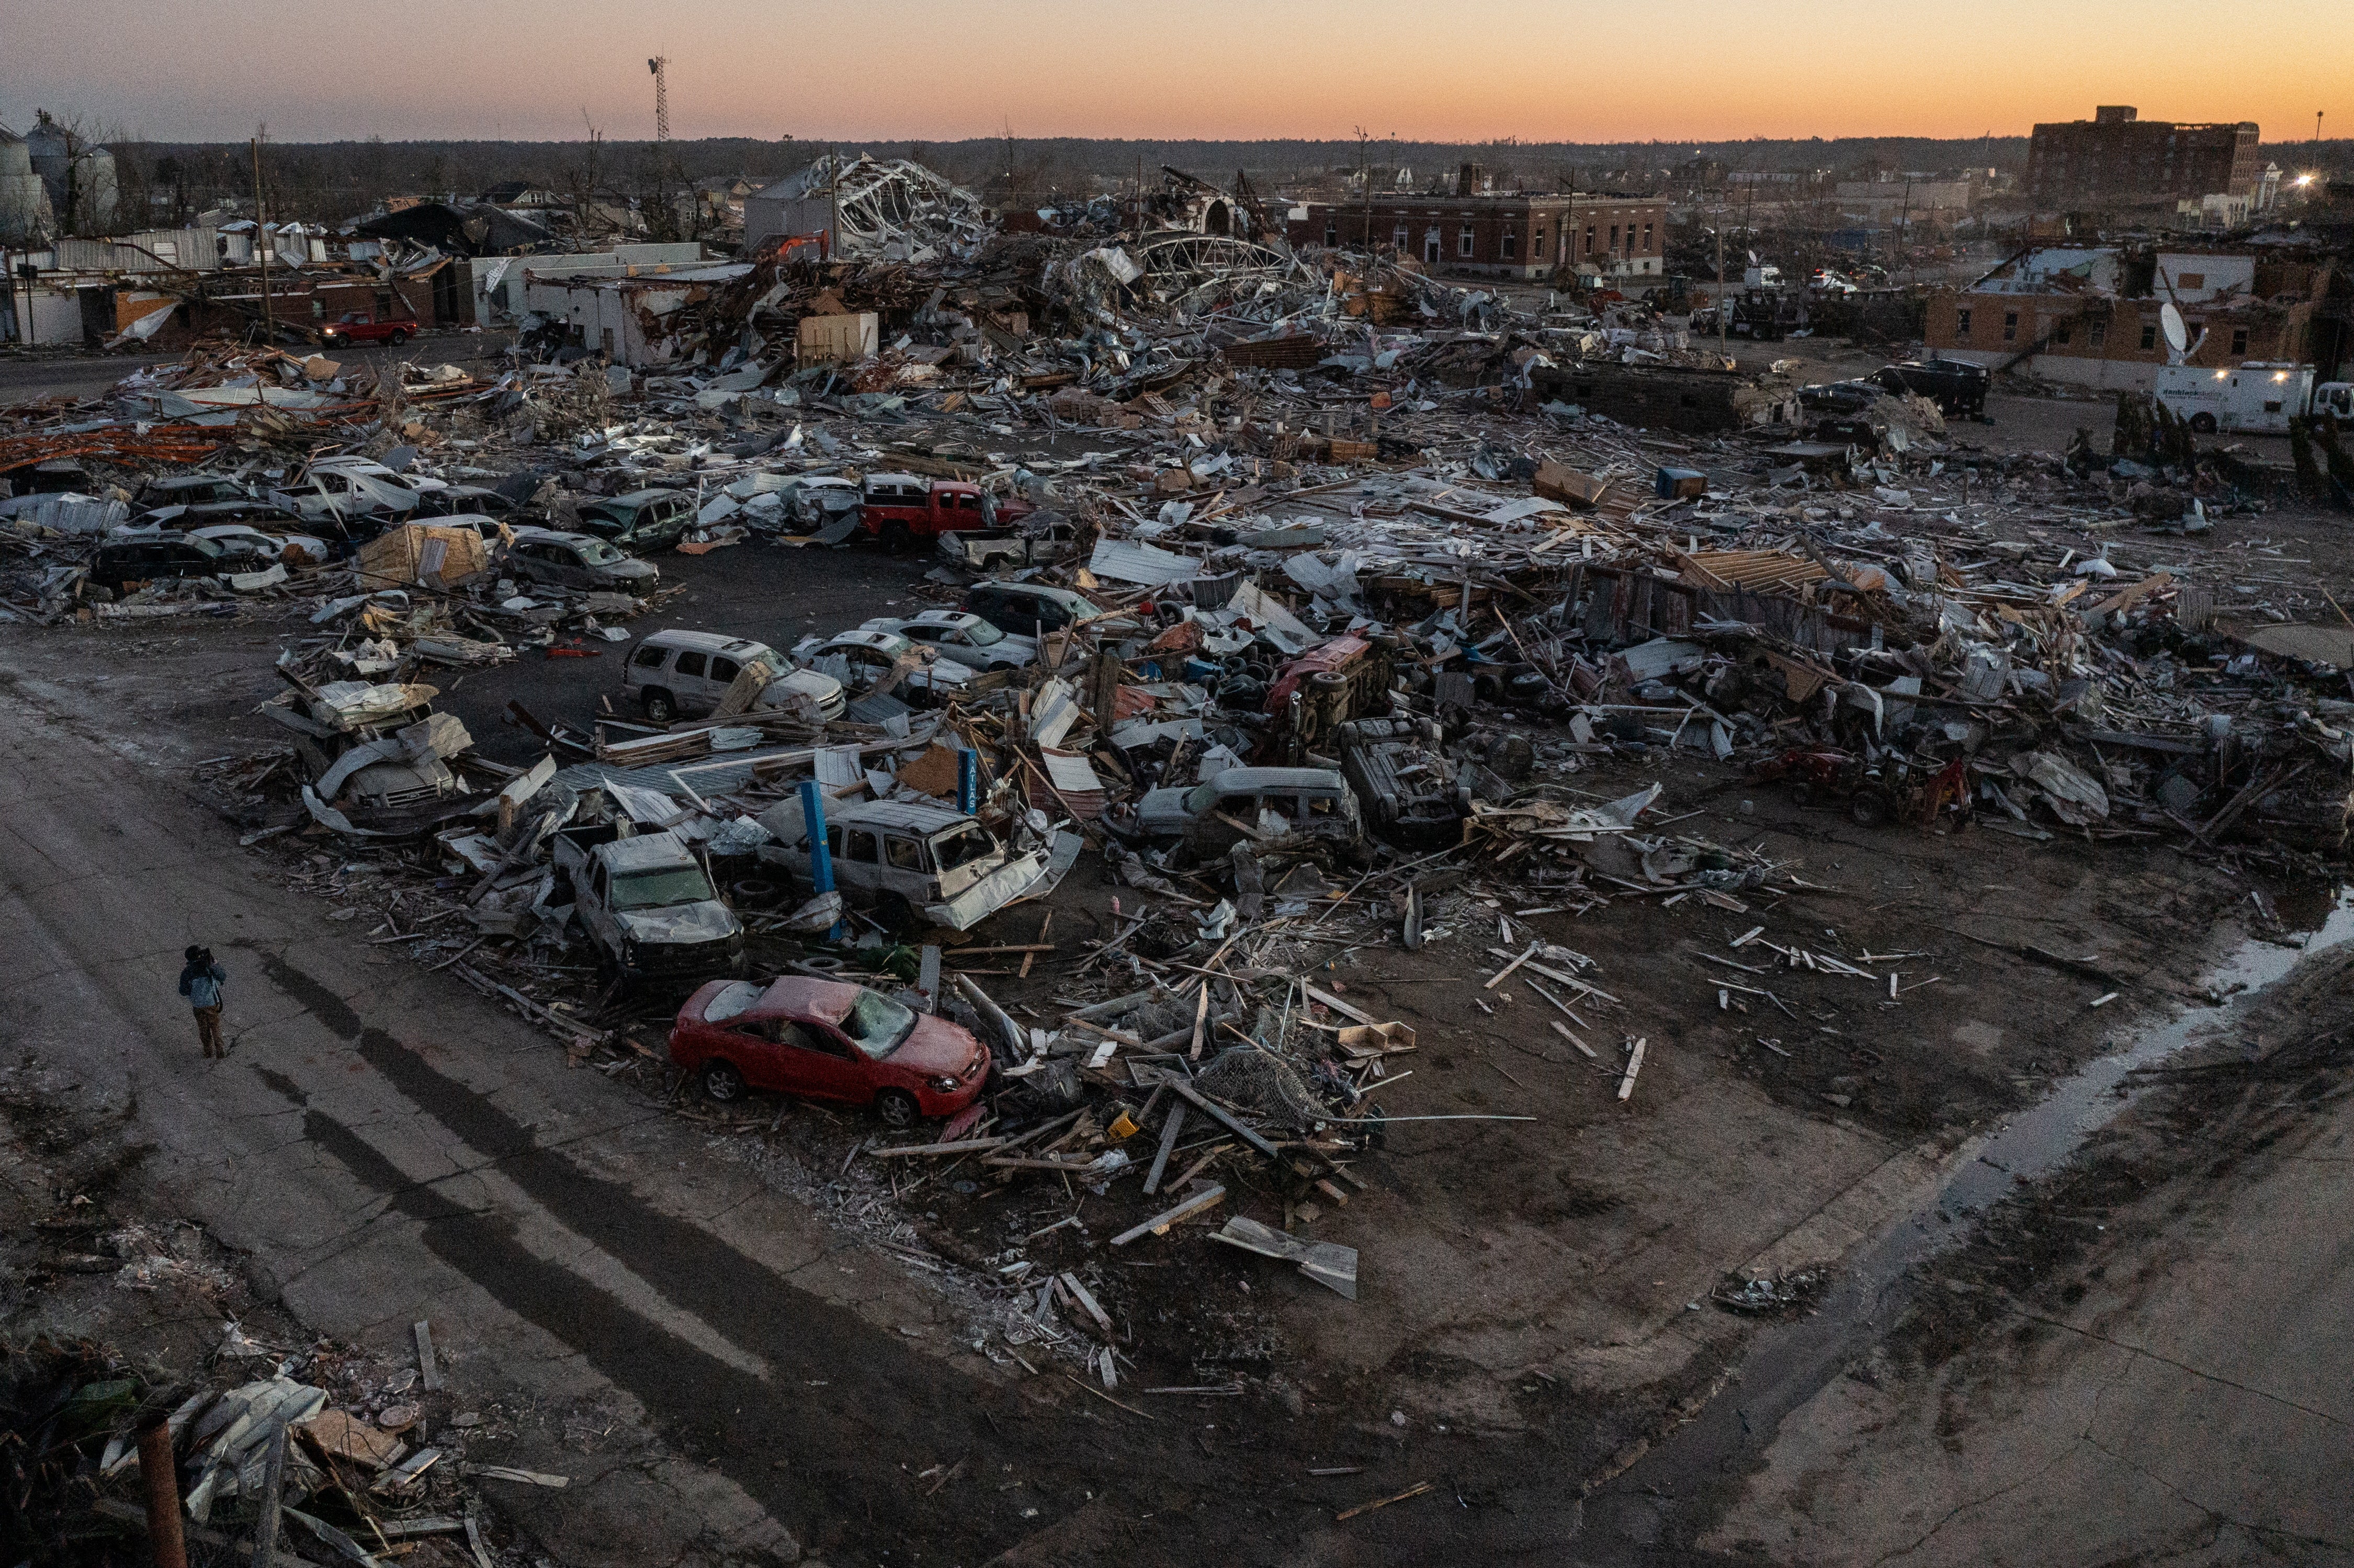 A man walks past destroyed residences and businesses in the aftermath of a tornado in the city center of Mayfield, Kentucky, U.S. December 13, 2021